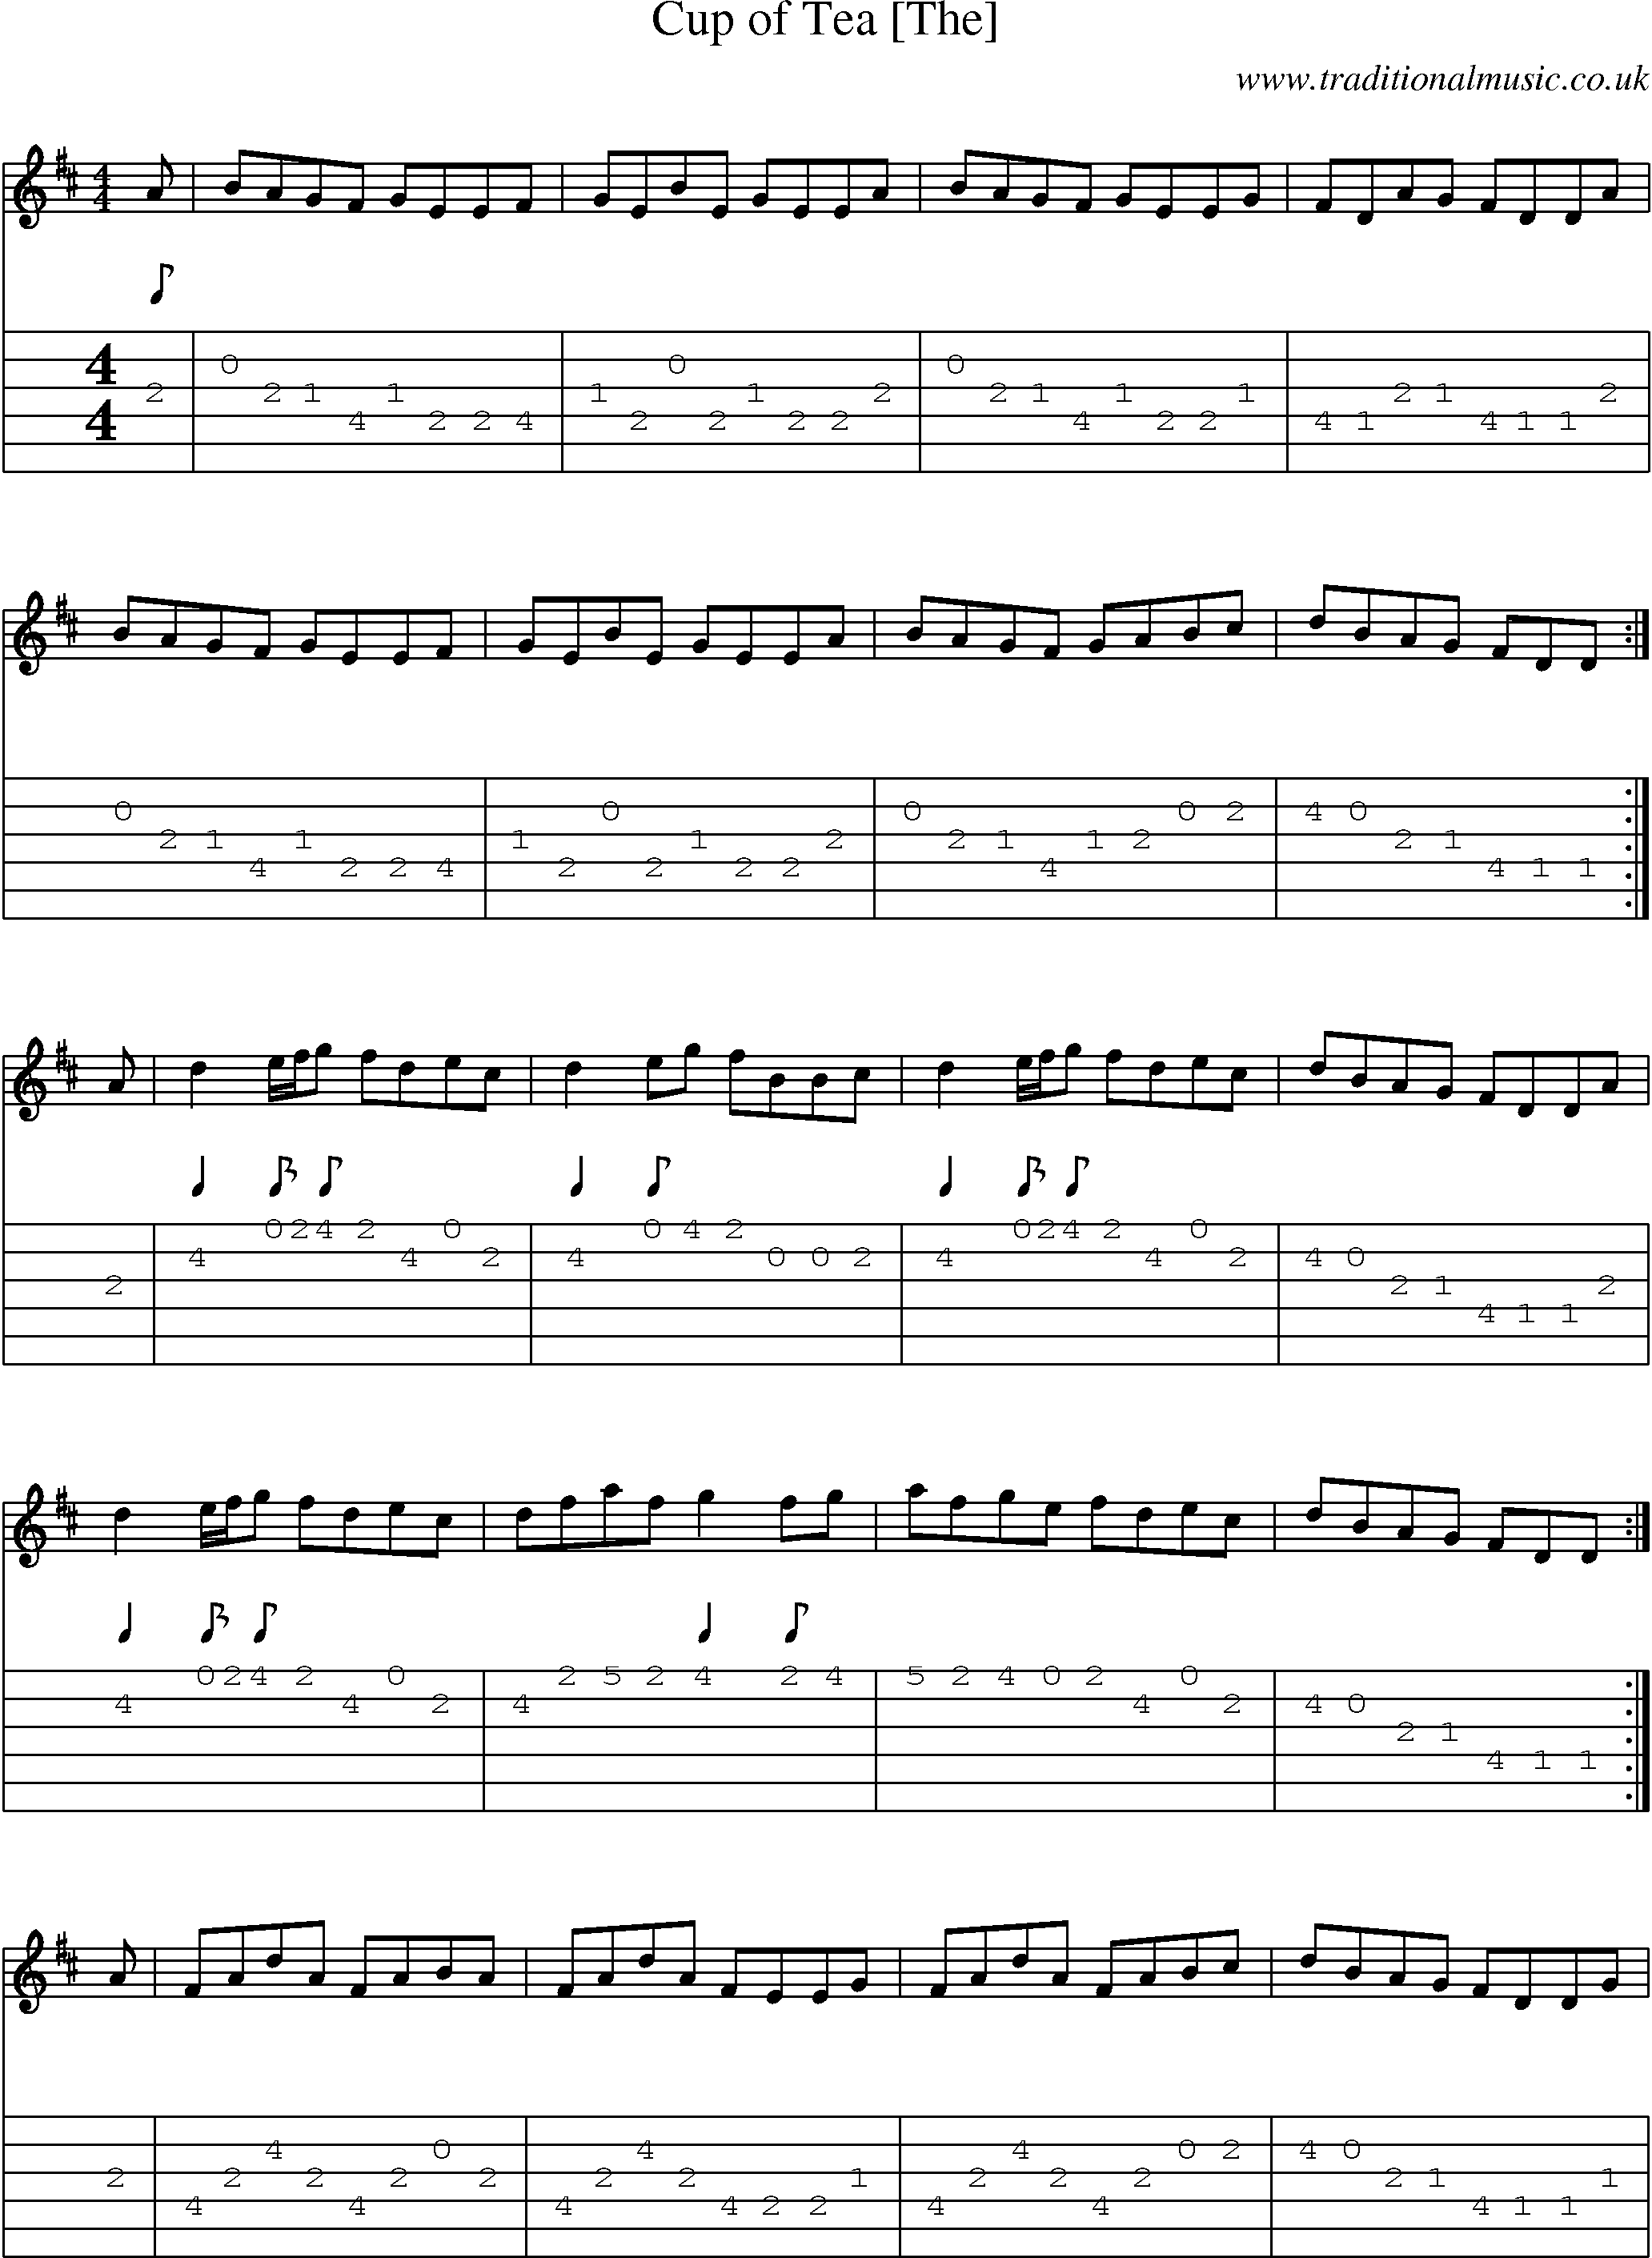 Music Score and Guitar Tabs for Cup of Tea 